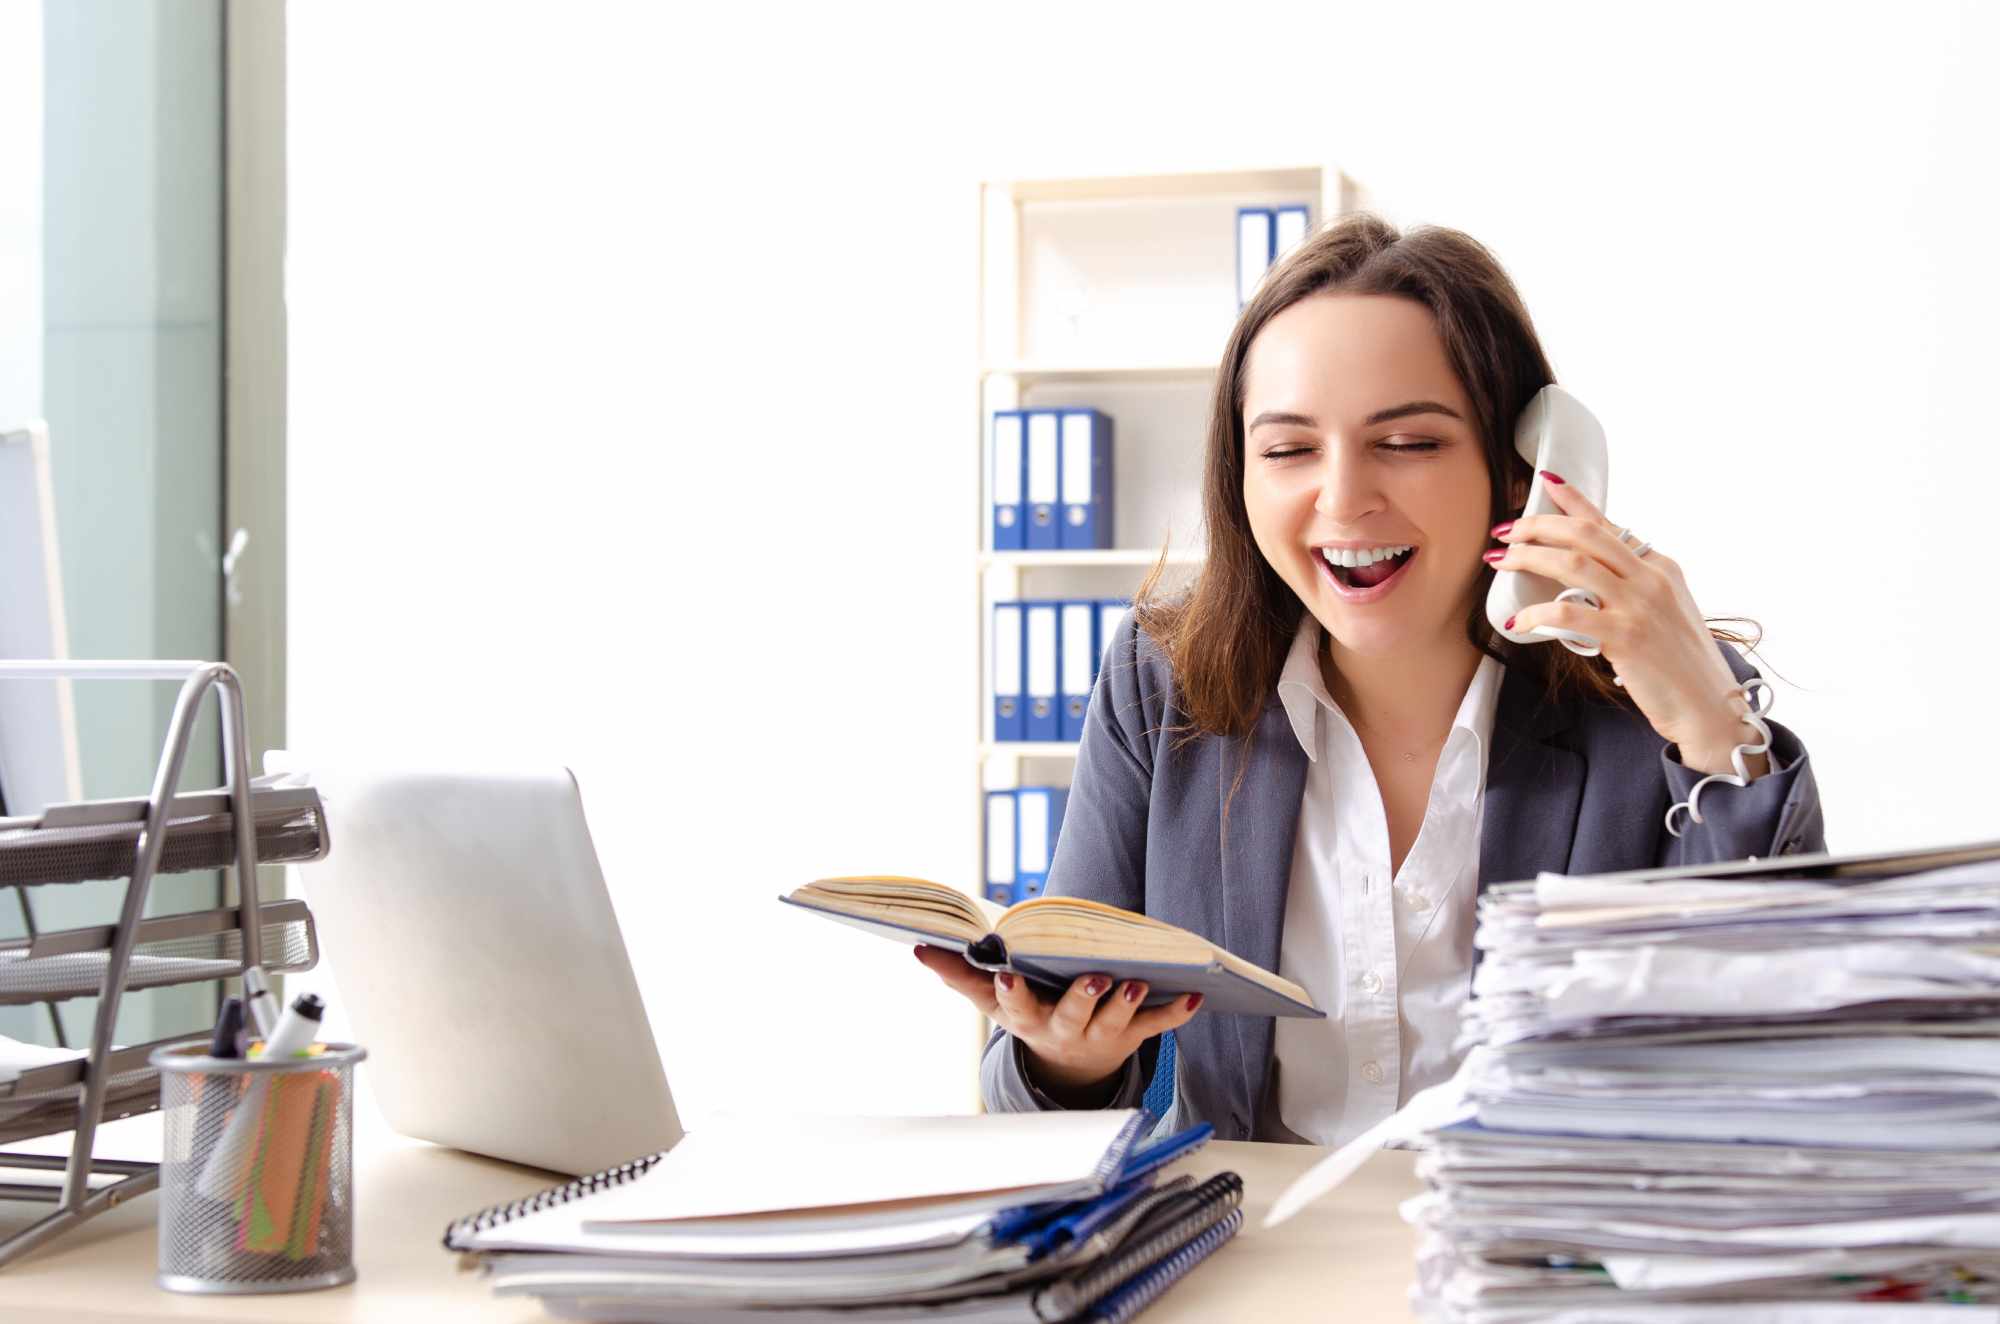 Young female employee unhappy with excessive work but laughing while reading a book